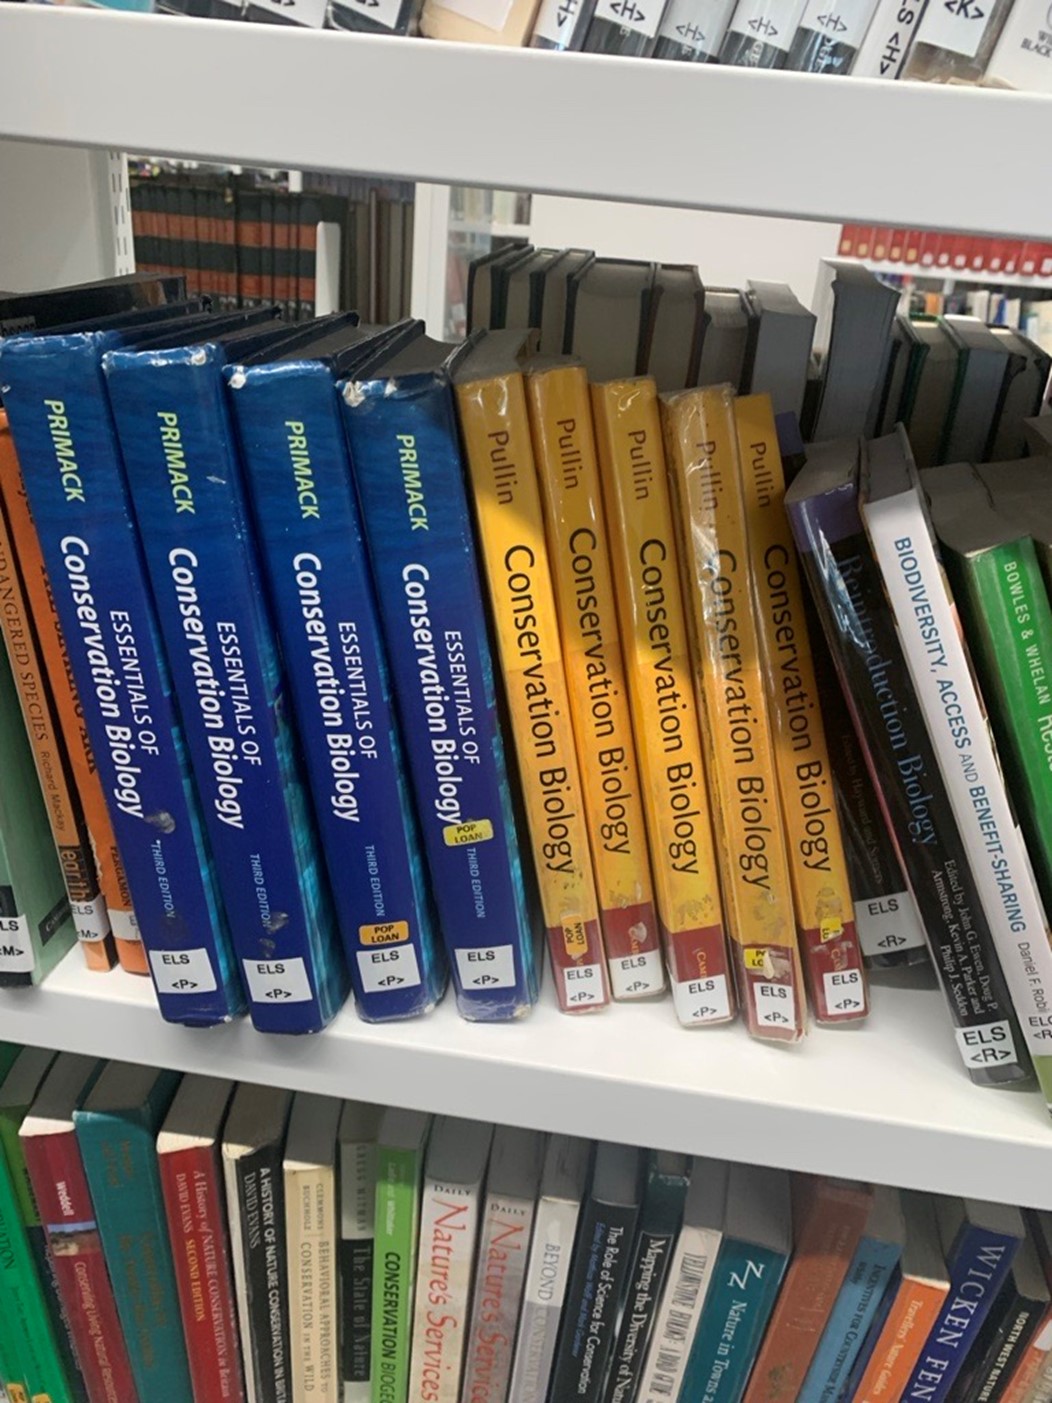 Biology textbooks on a shelf in the library.